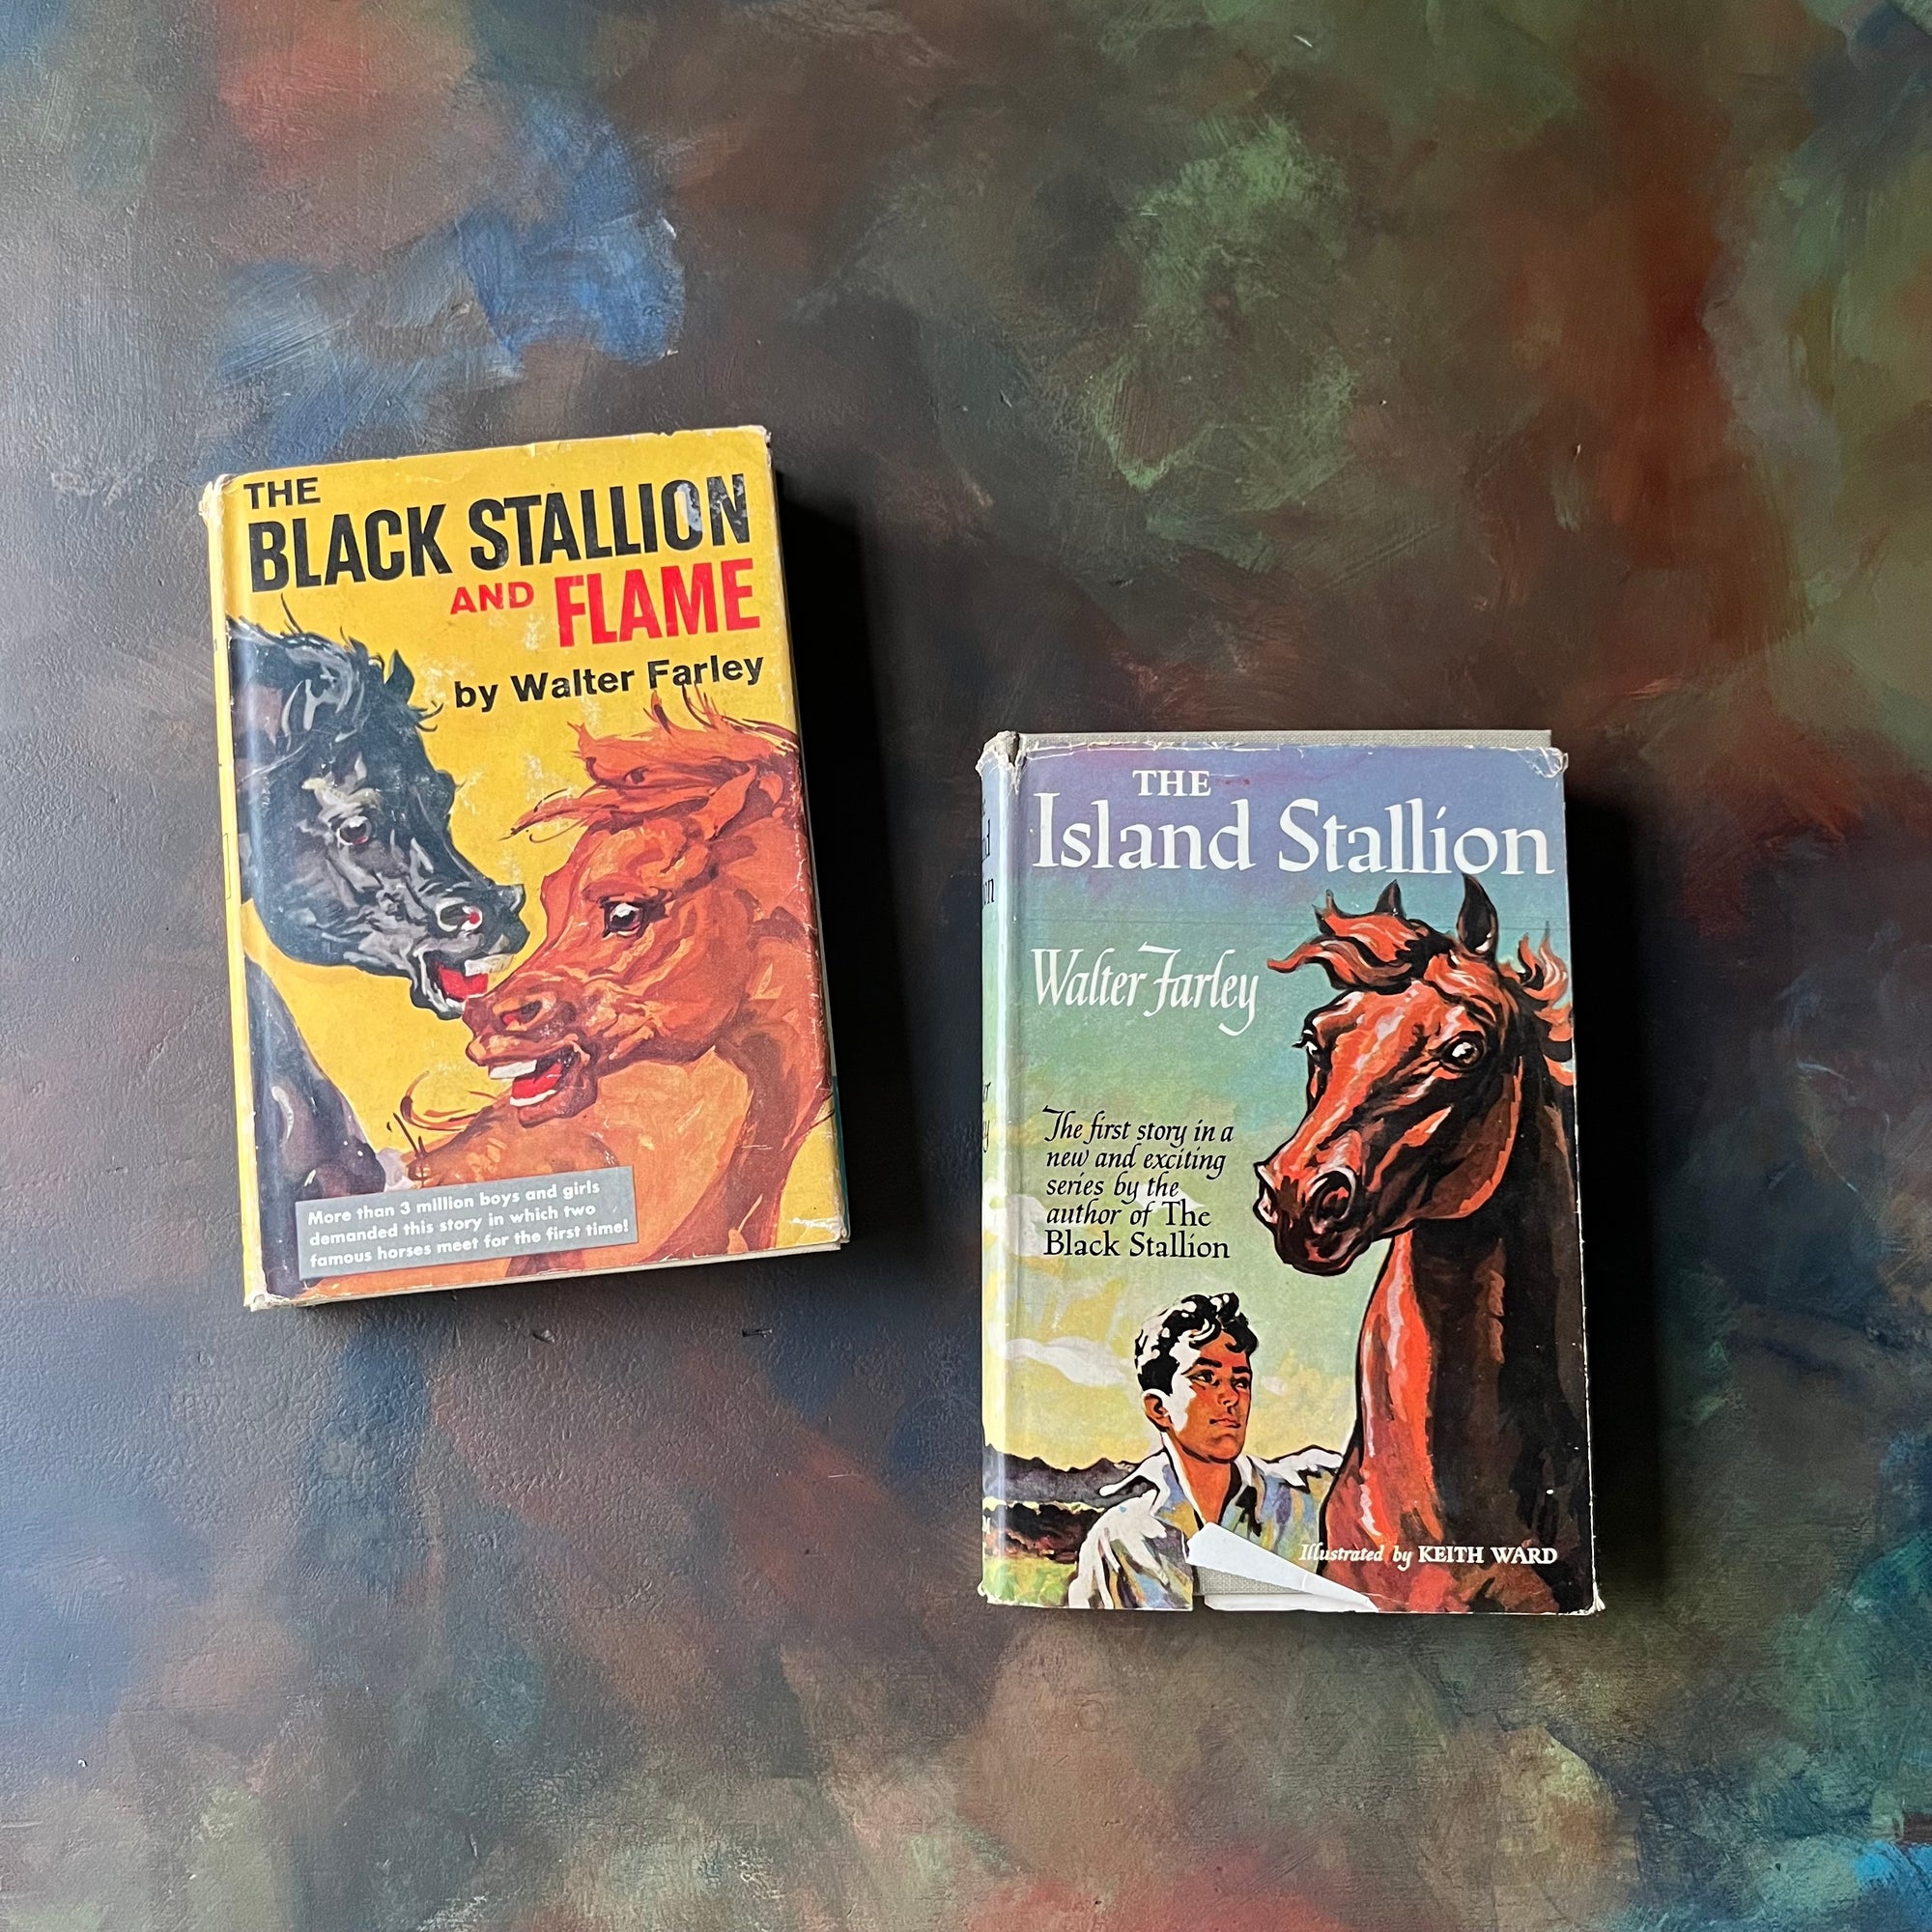 Set of Three Dick Druna Books-Dick Druna's Cinderella, Dick Druna's Tom Thumb & Dick Druna's Little Red Riding Hood-vintage fairy tales-view of the dust jacket's front covers - books are sitting on a table I painted to look like an art palette